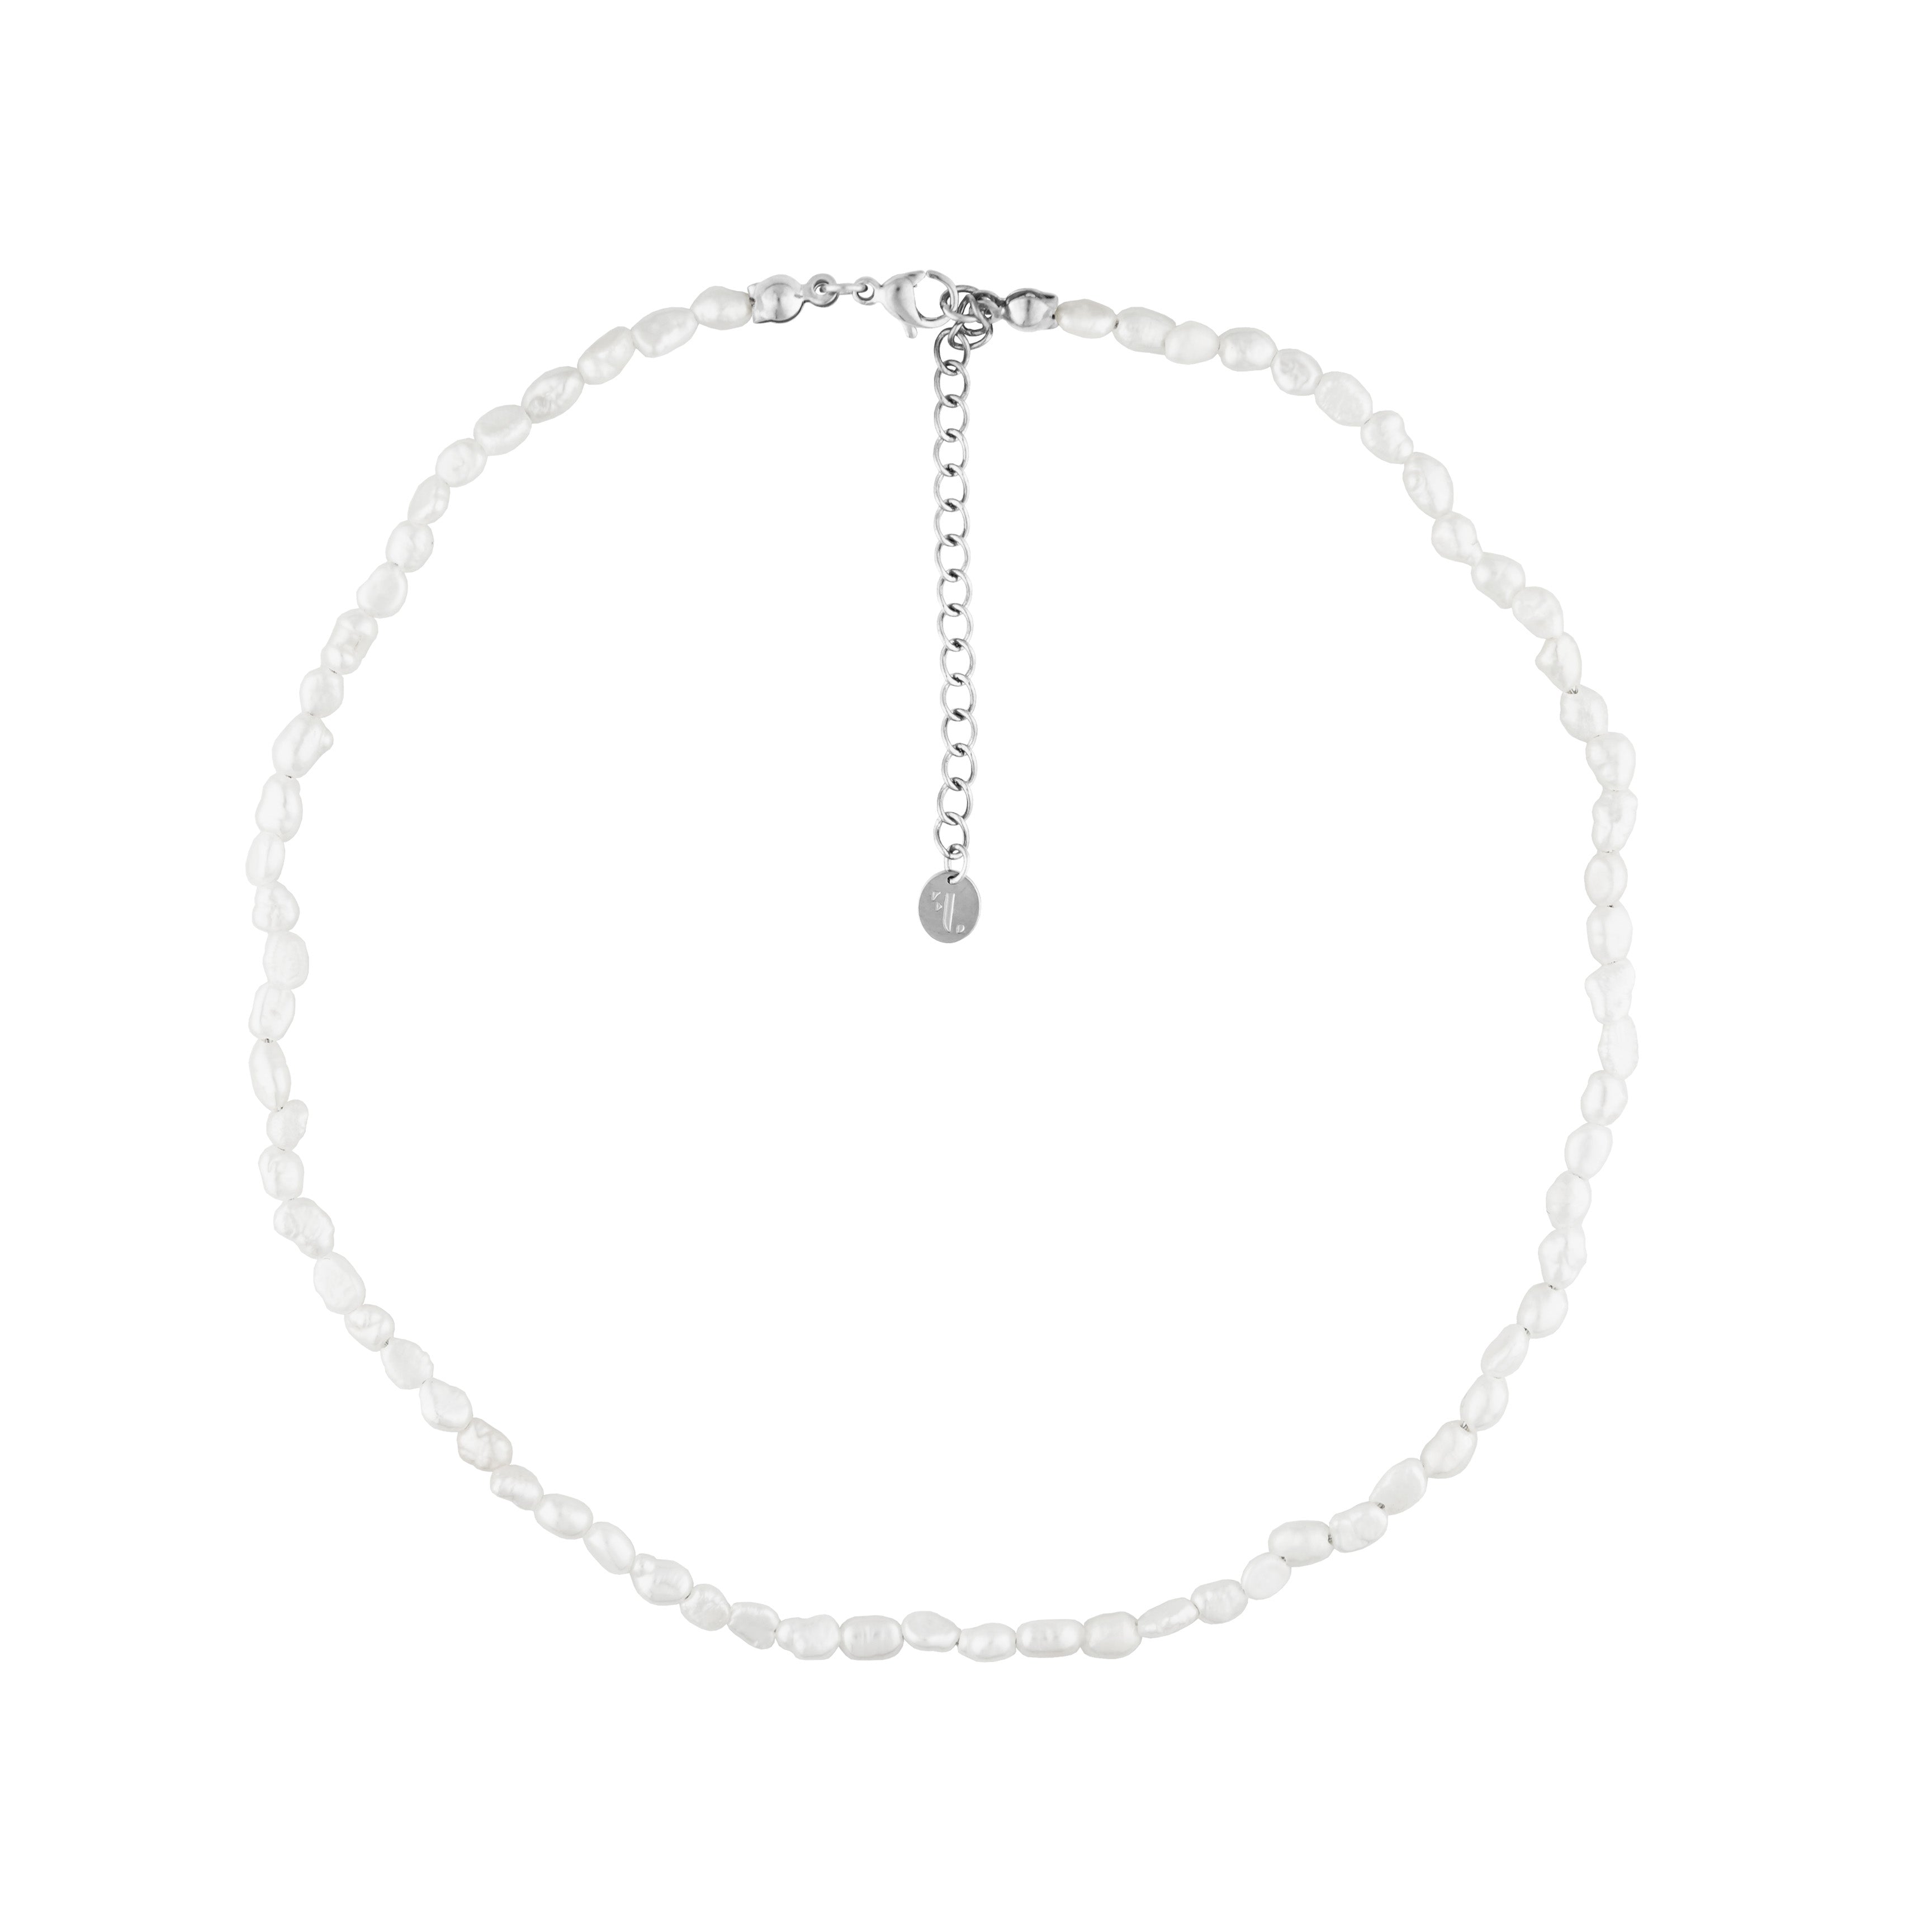 FJ Watches five jwlry jewel jewelry bijou natty var necklace collier white blanc beads billes natural naturel pearls perles small petite 2mm 3mm 37cm 5cm extension ajustable adjustable women water proof eau resistant montreal canada design silver argent